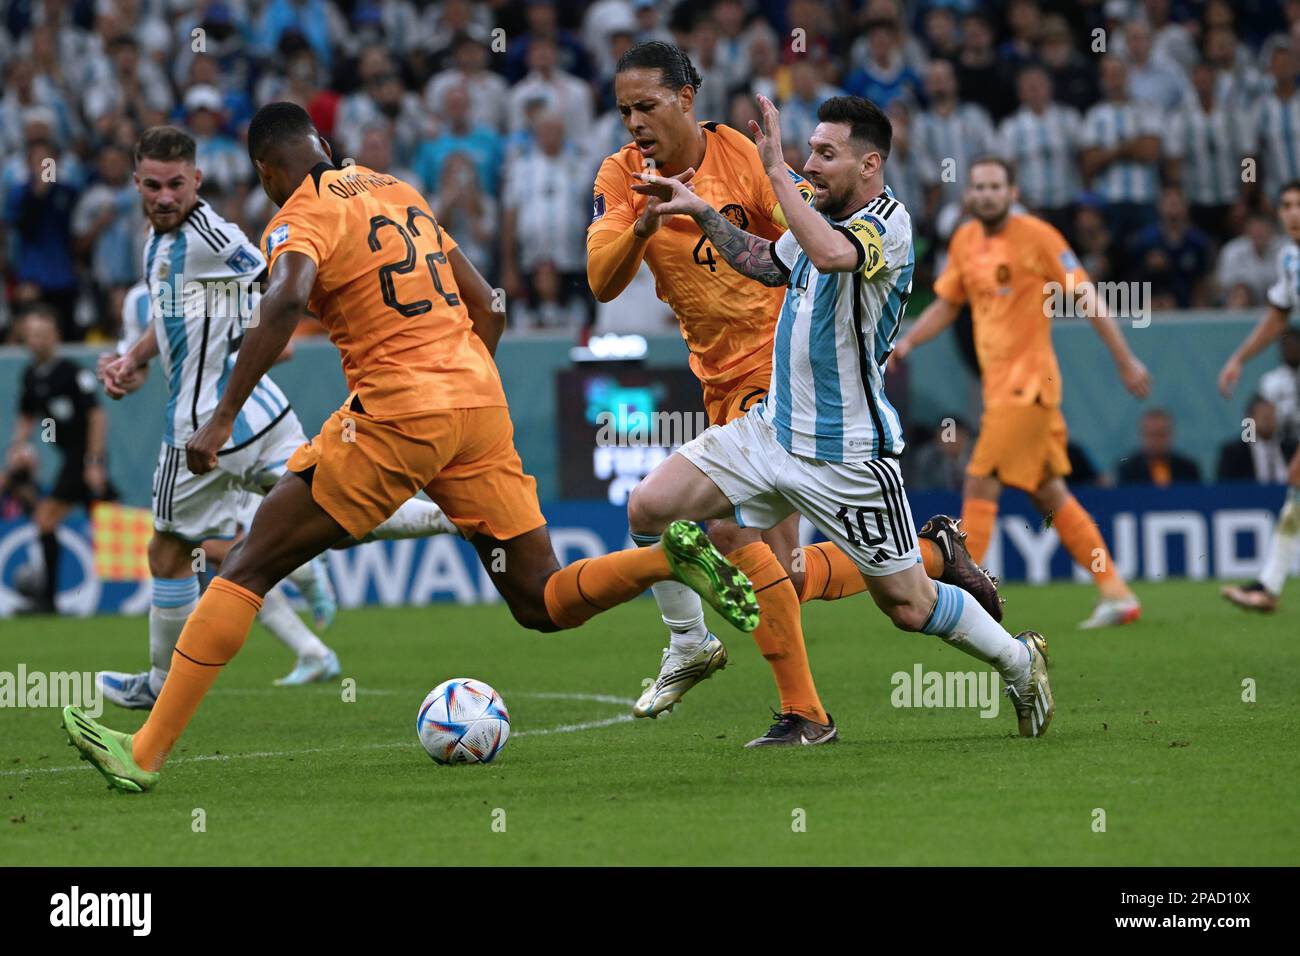 Lionel Messi (Argentina) wins a footrace against Holland's Virgil van Dijk and Denzel Dumfries in Argentina's quarter-final win in the 2022 World Cup. Stock Photo